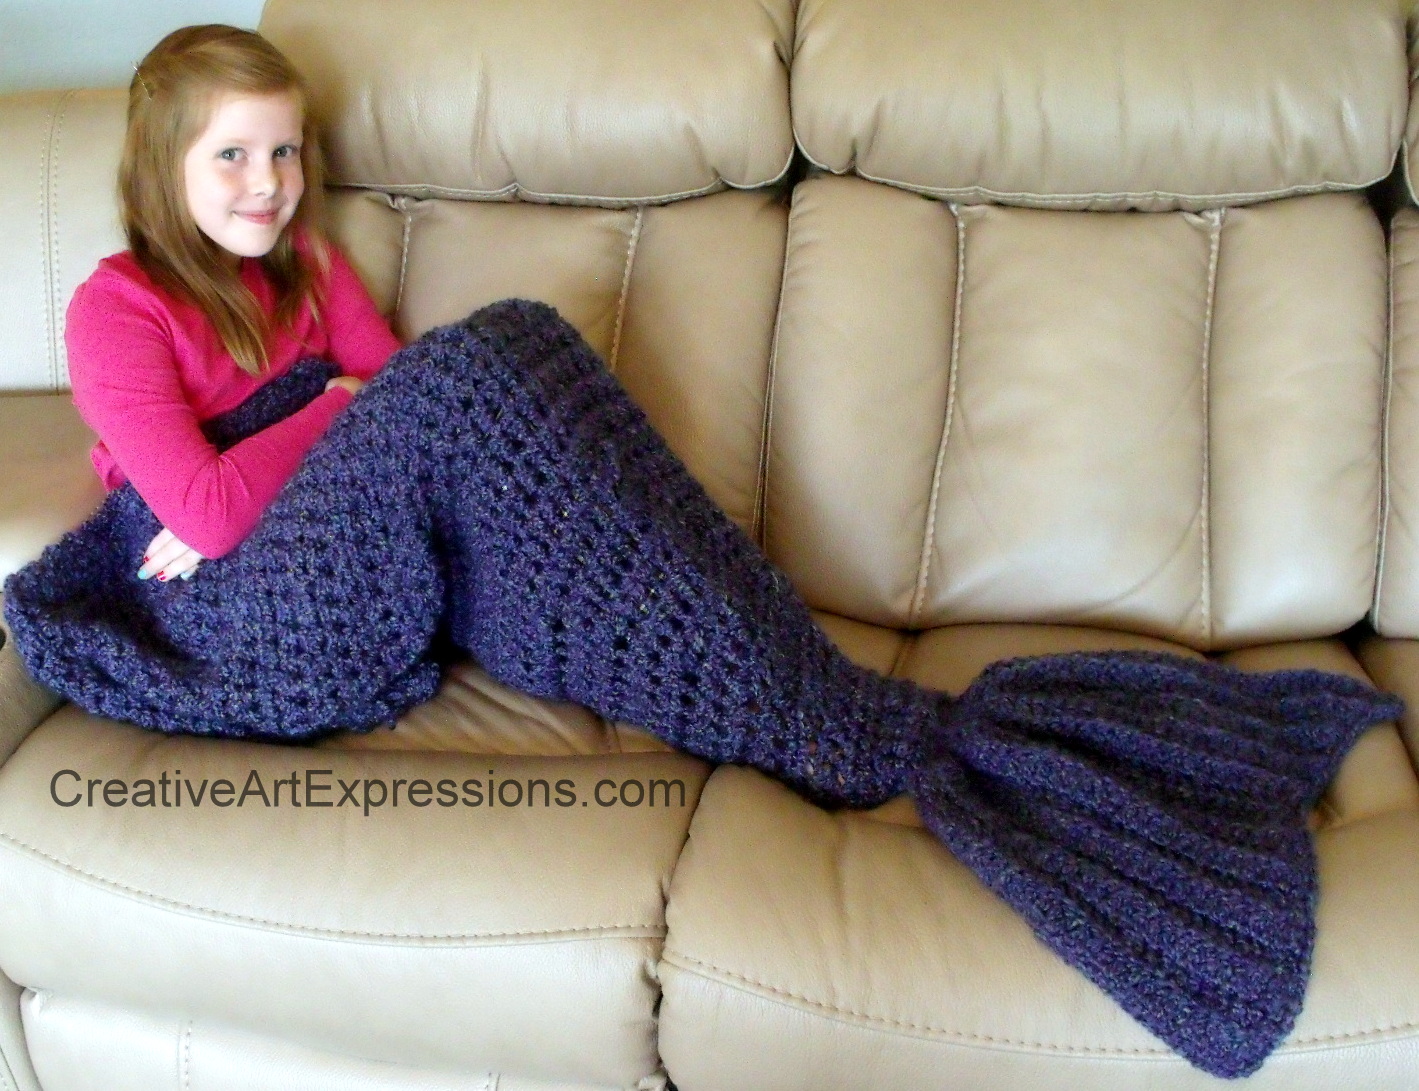 Creative Art Expressions Hand Crocheted Child Made To Order Mermaid Blanket